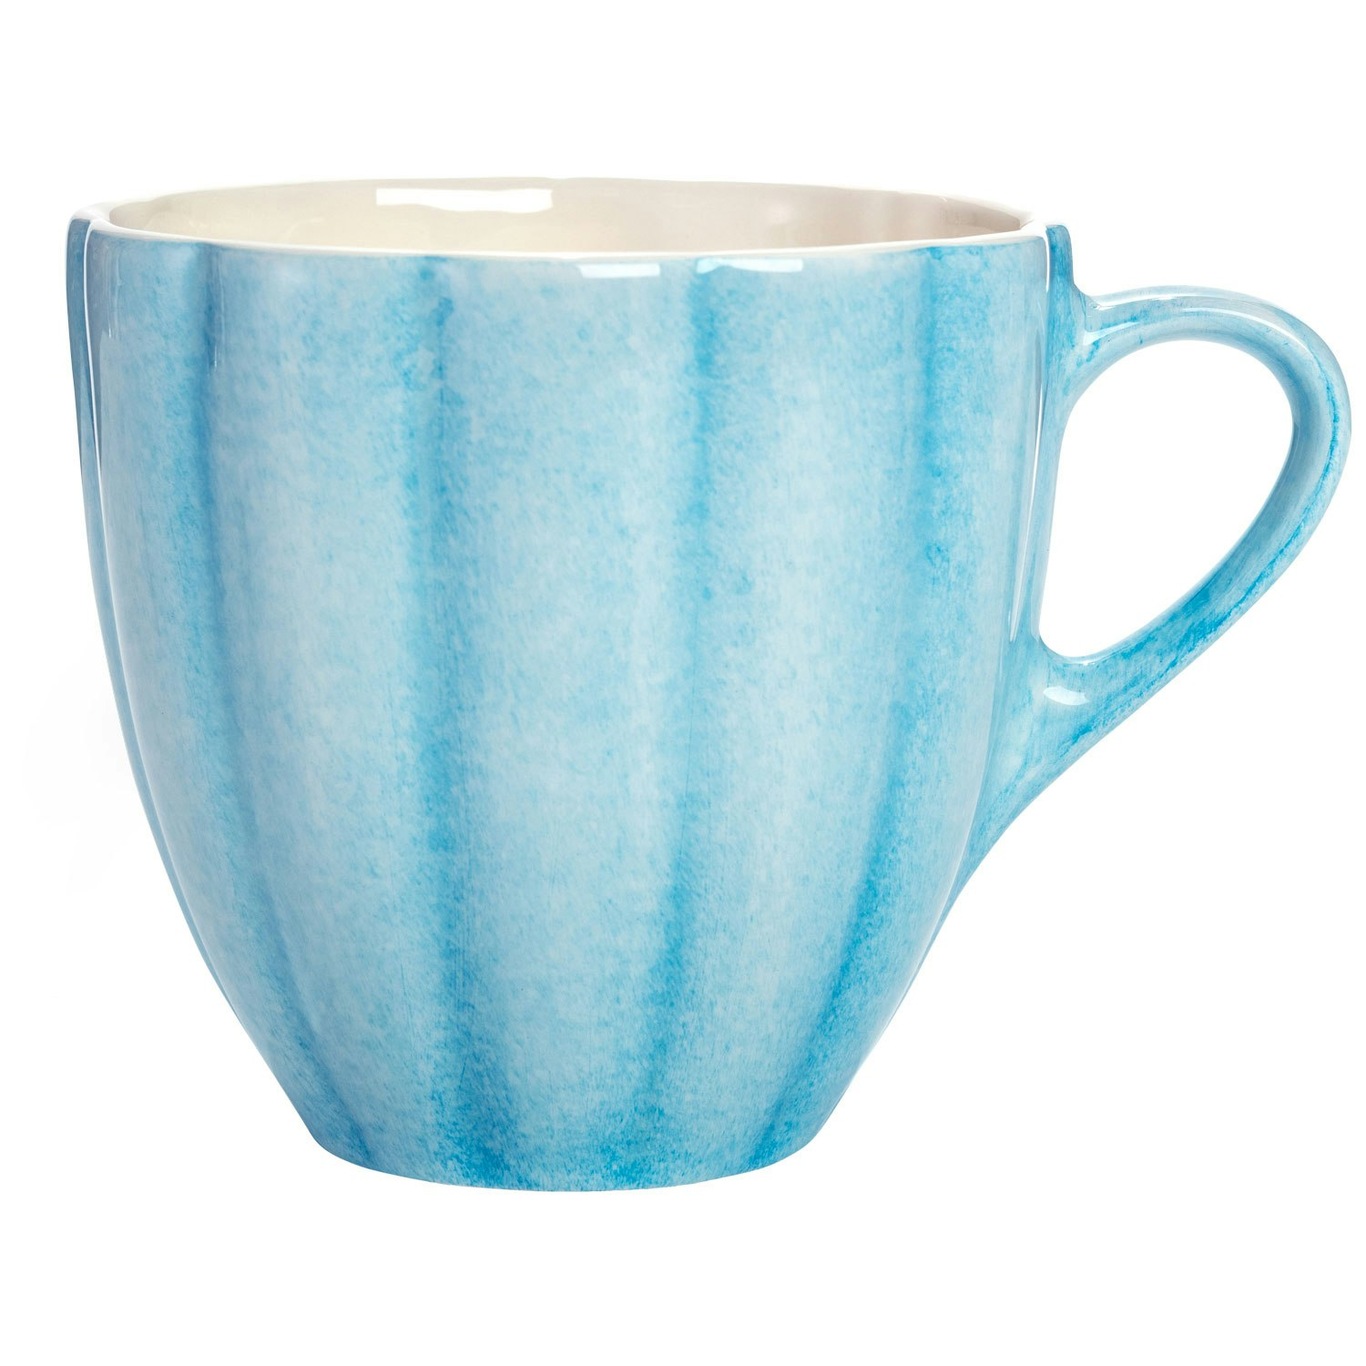 Oyster Mug 60 cl, Turquoise